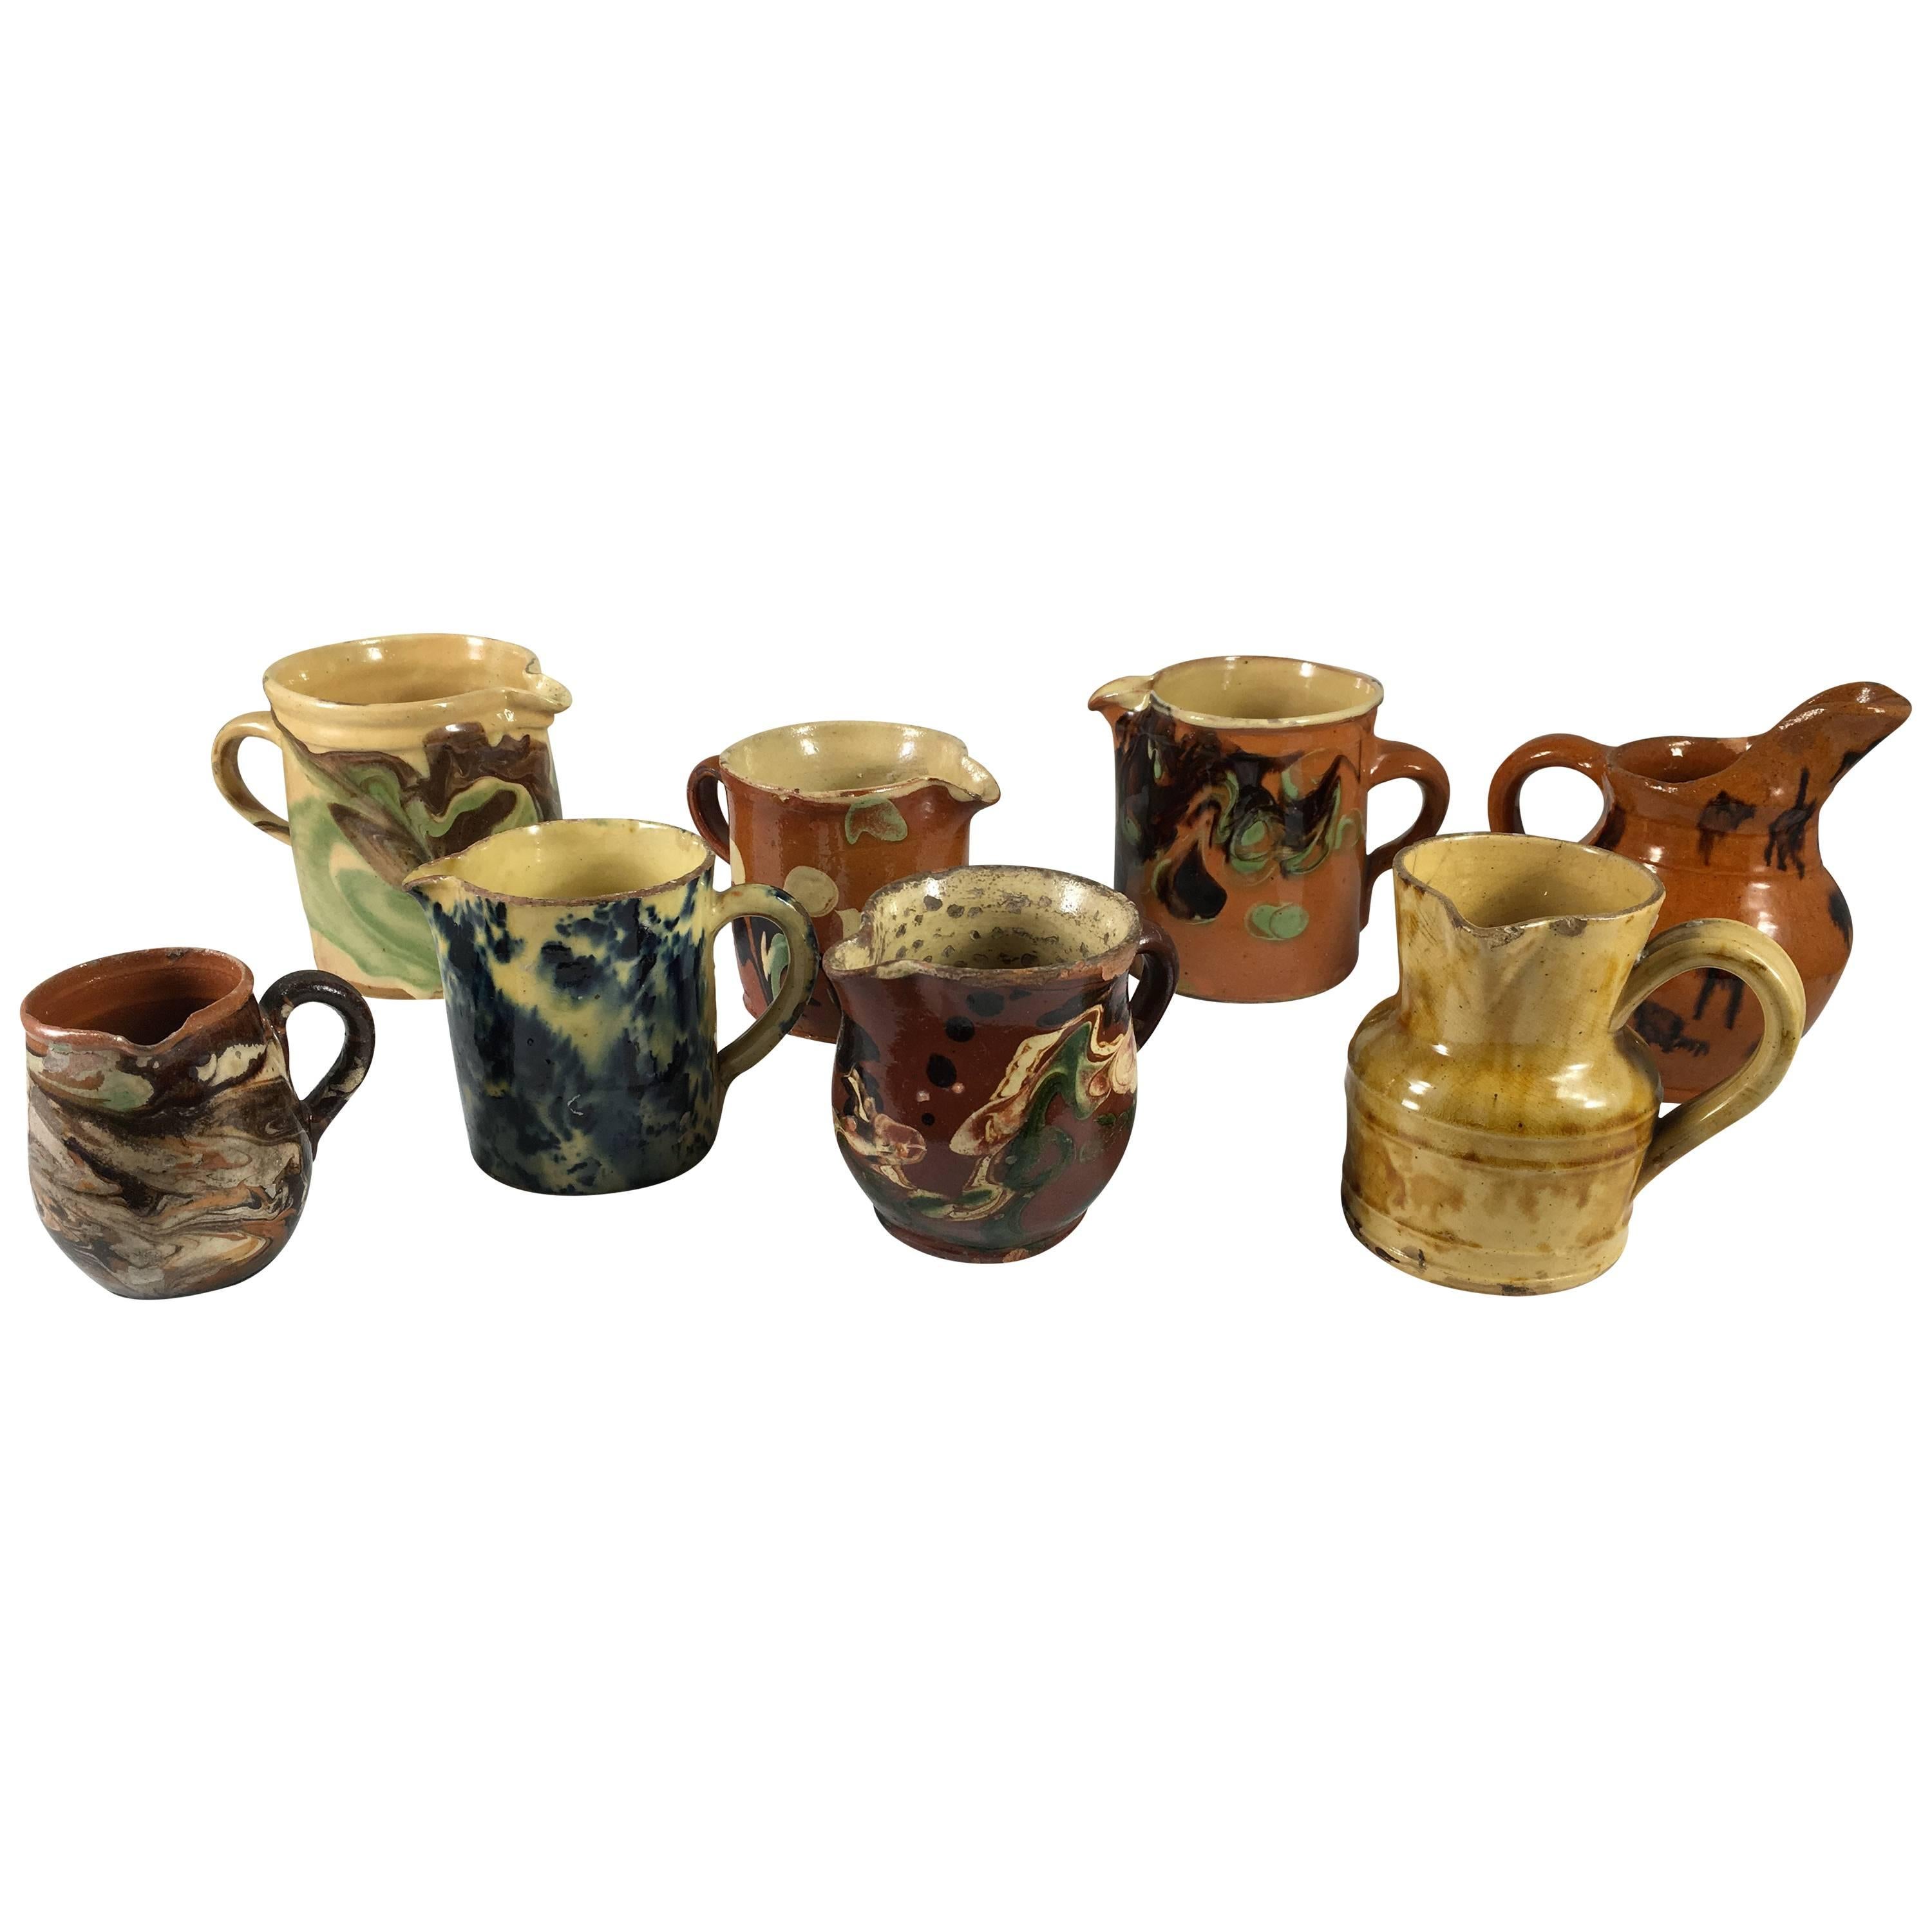 Collection of Eight Small French Provincial Jaspe Cream Pitchers, 19th Century